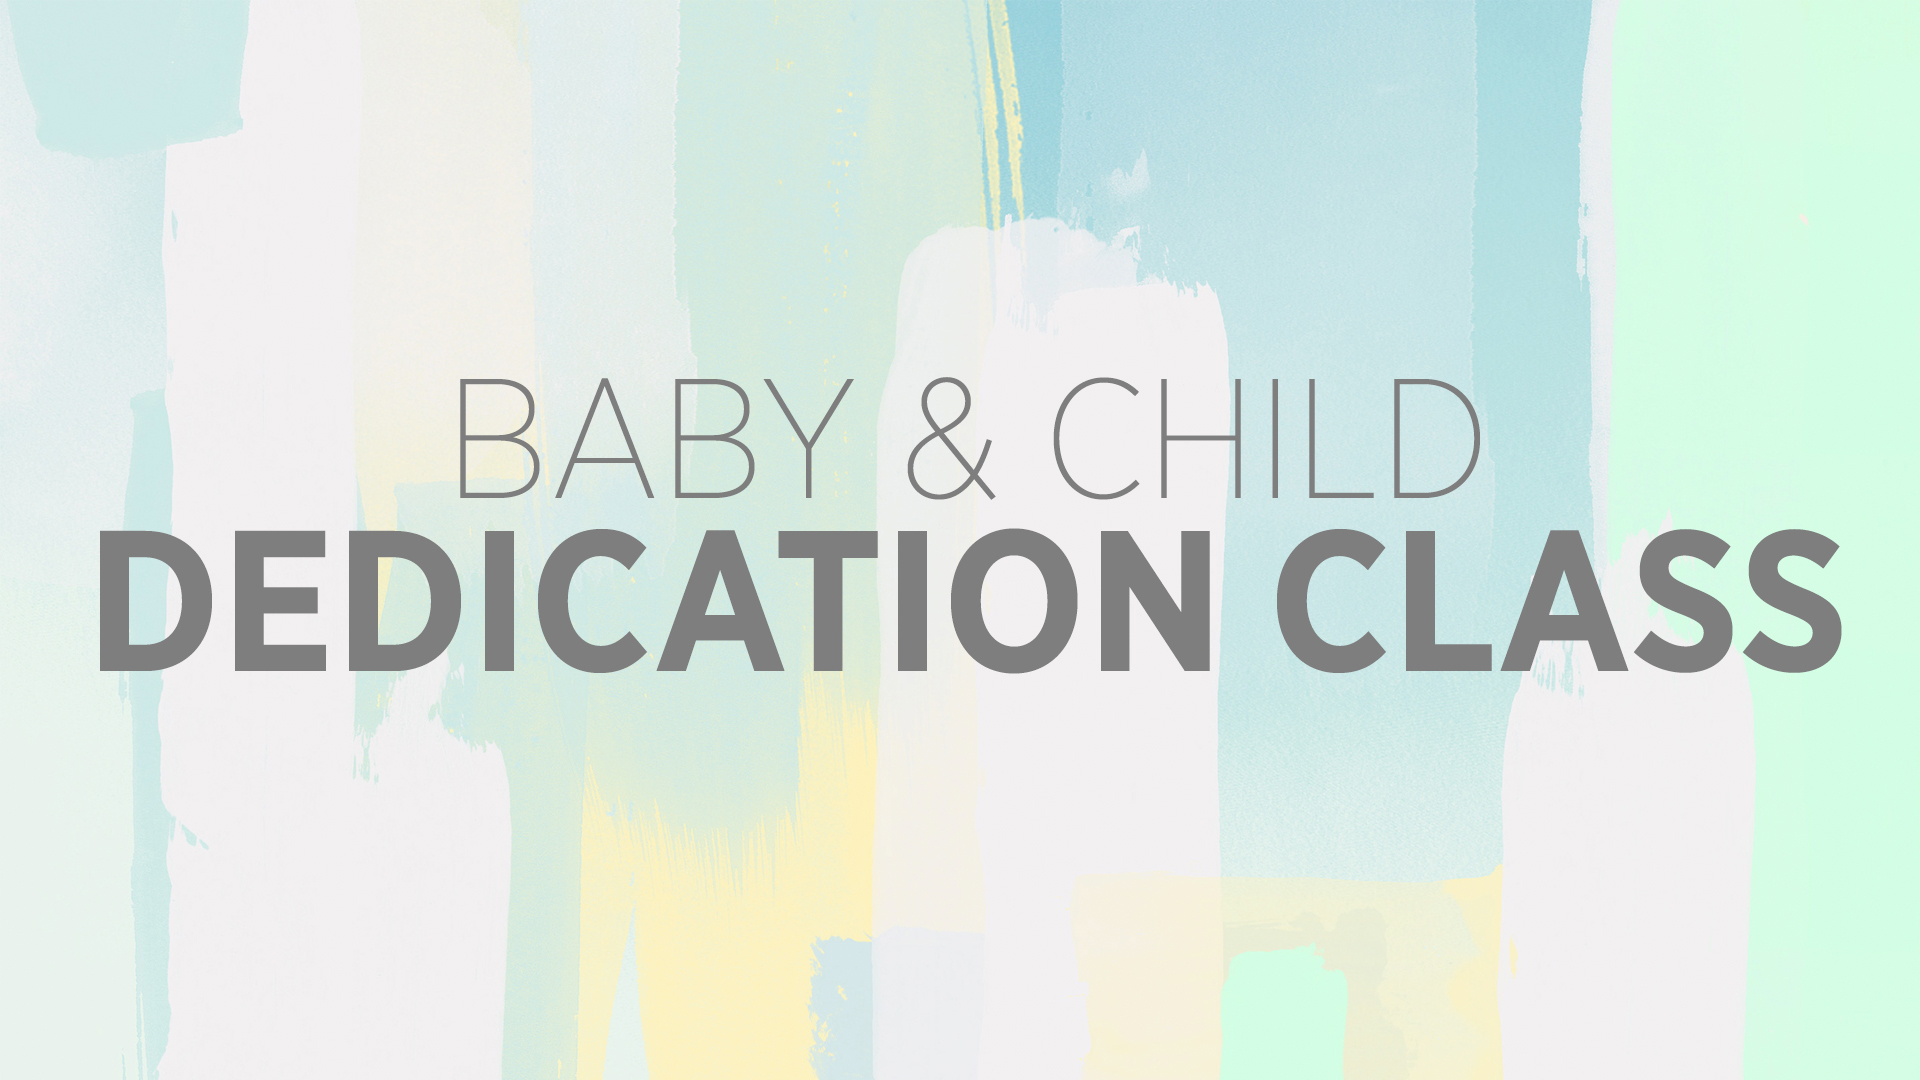 Pastel background with Baby and Child Dedication Class title.